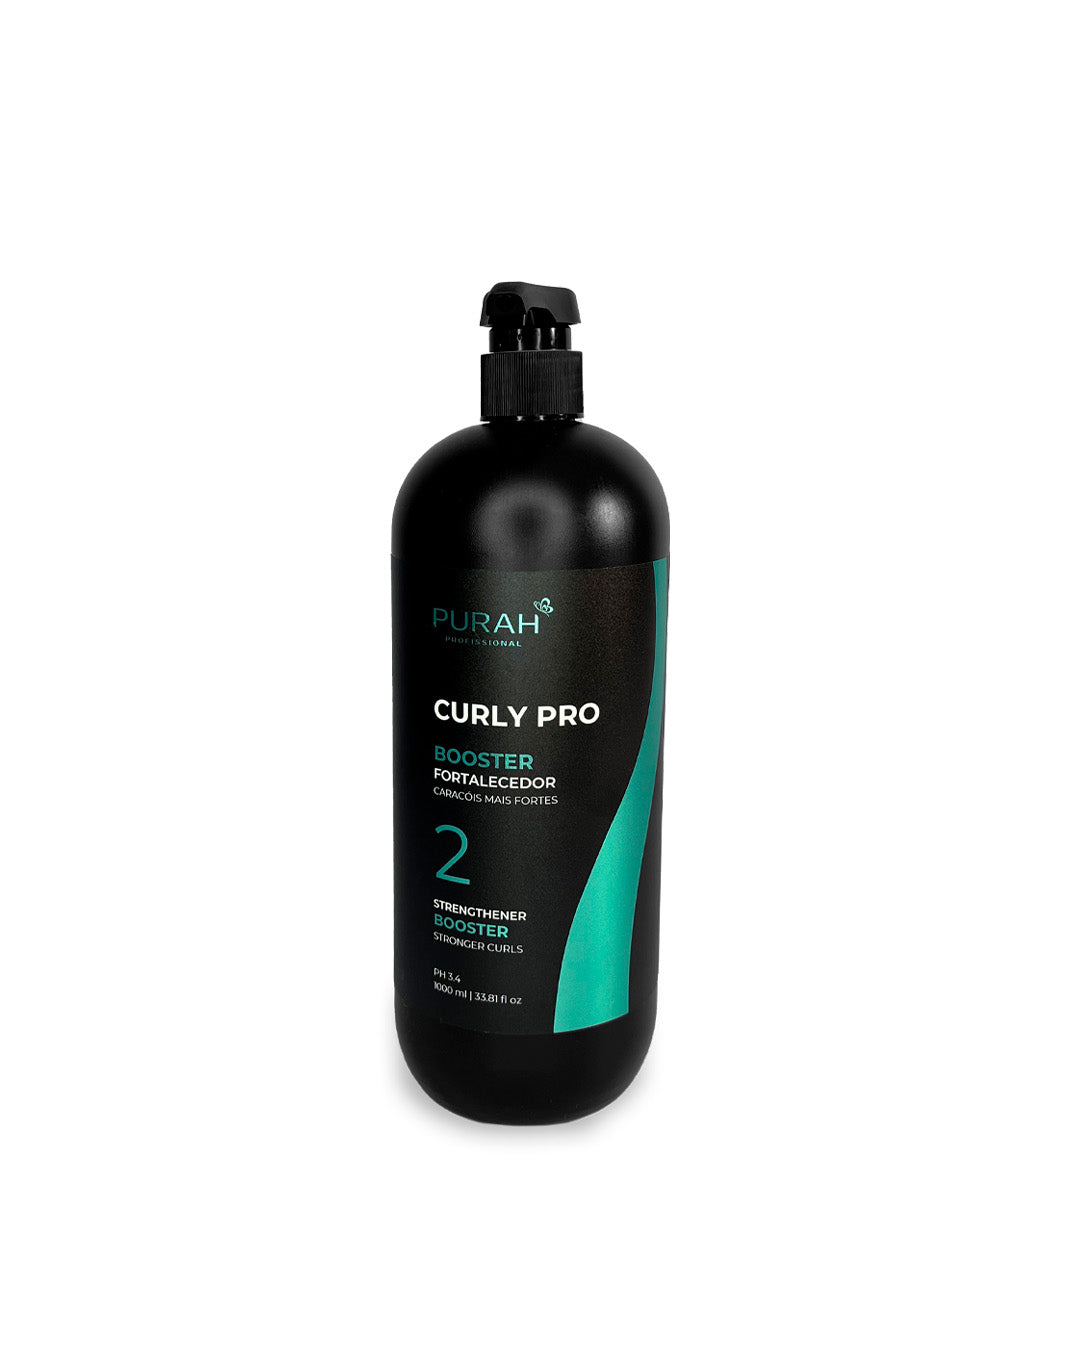 Curly Pro Booster Fortalecedor